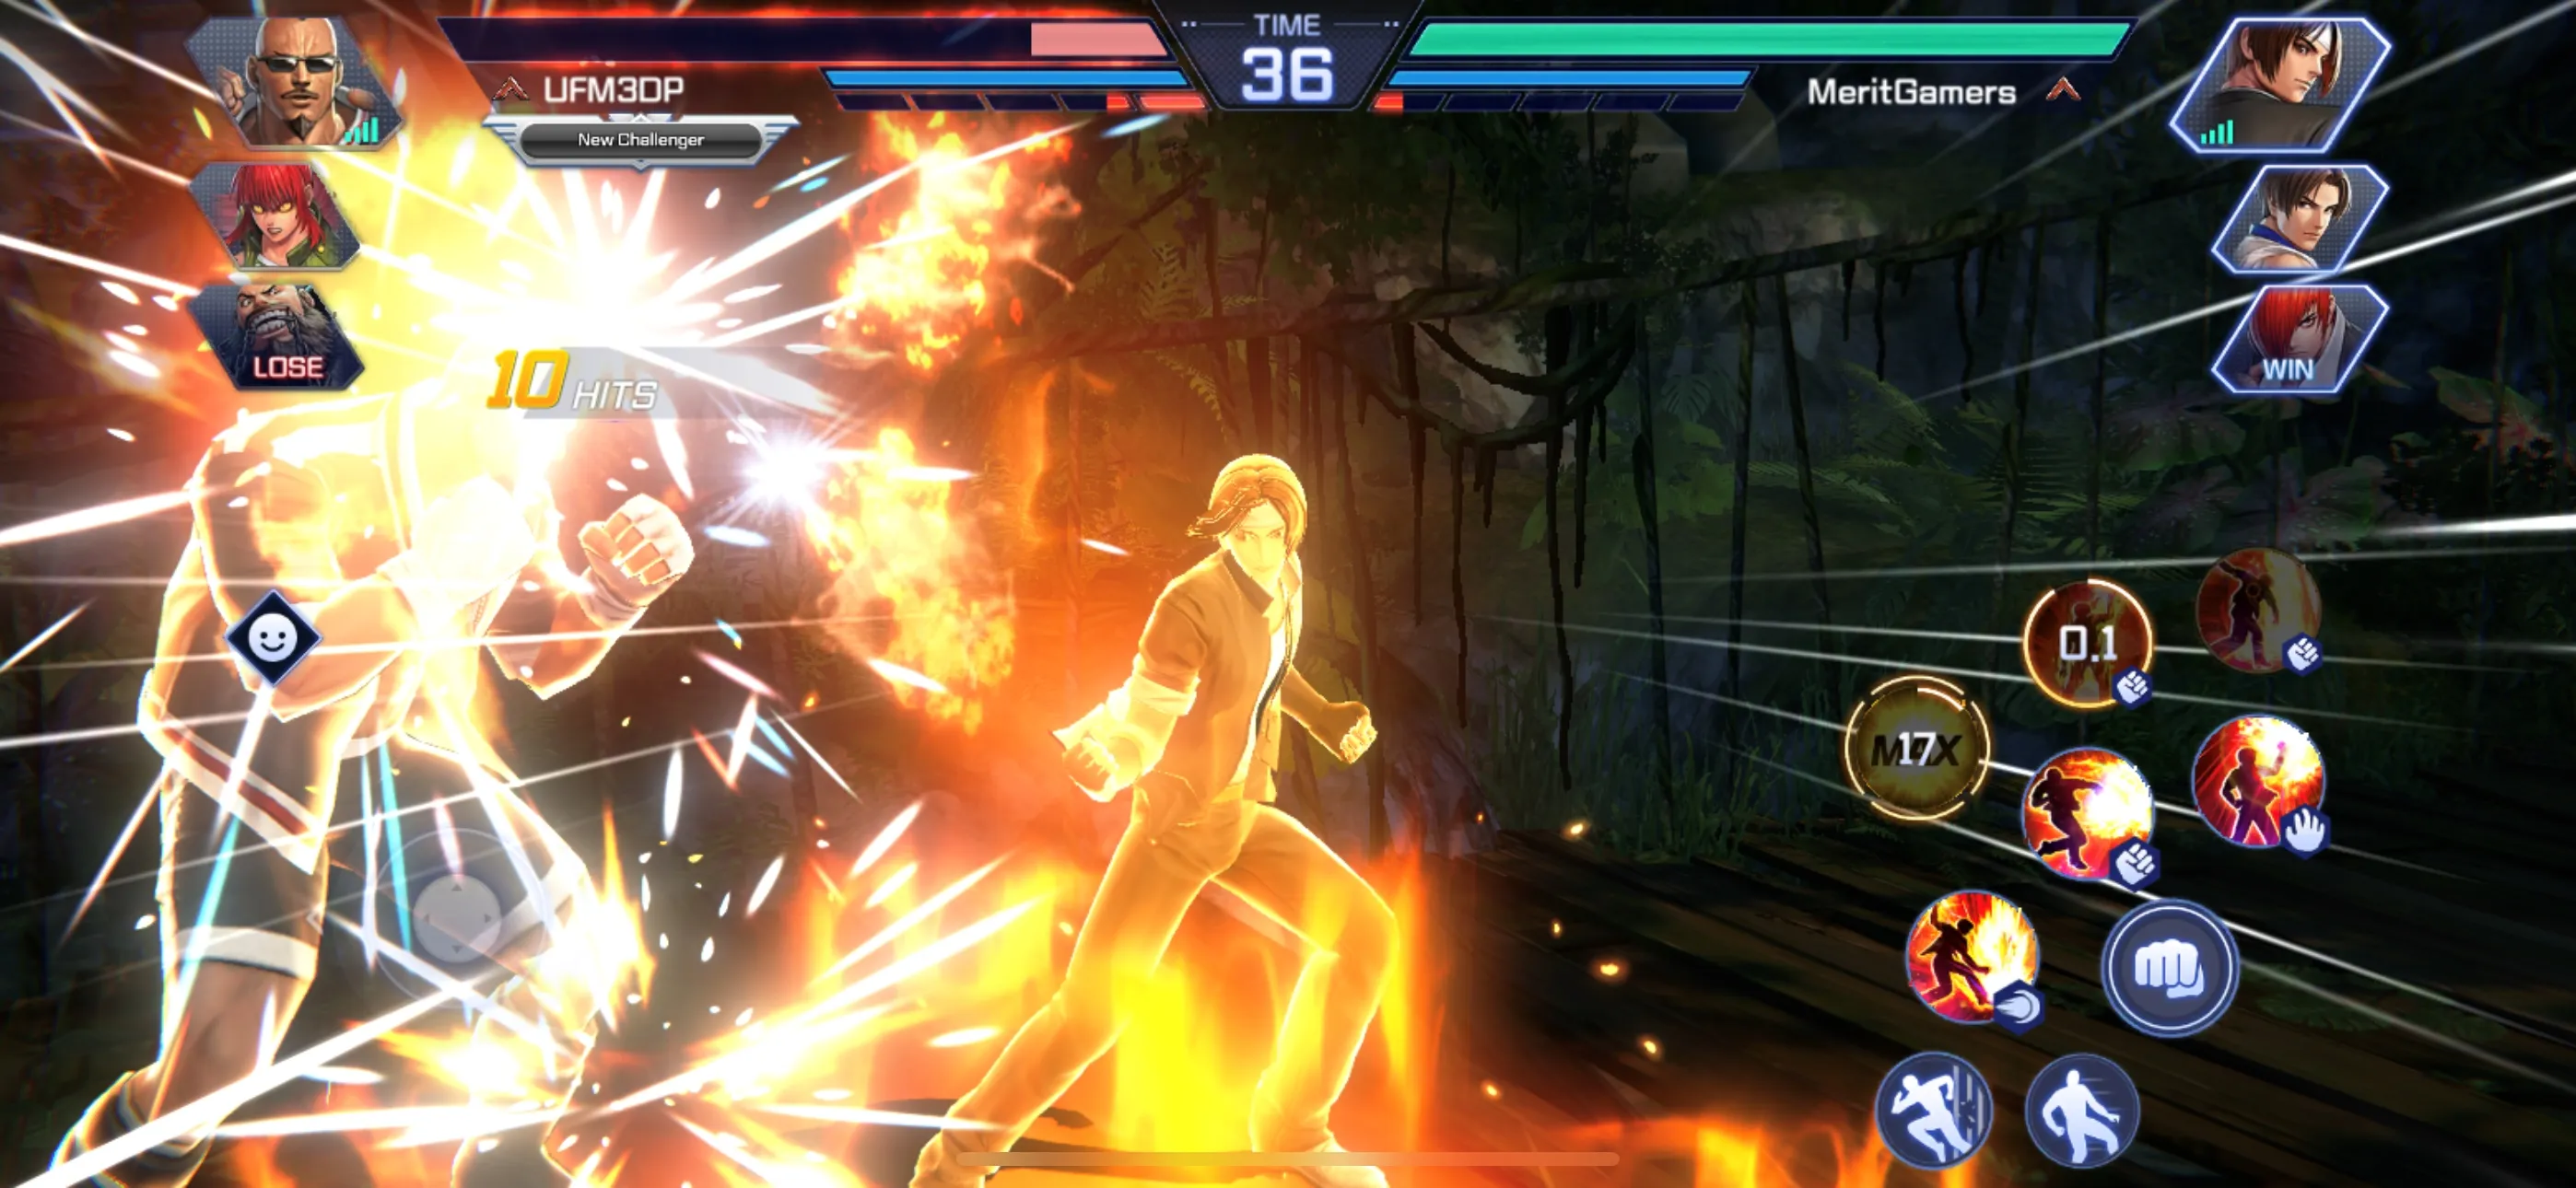 One of the fighters uses its ultimate power to defeat the opponent's fighter. The fighter's name is Kyo Kusanagi. Each fighter in the game has a unique ultimate skill